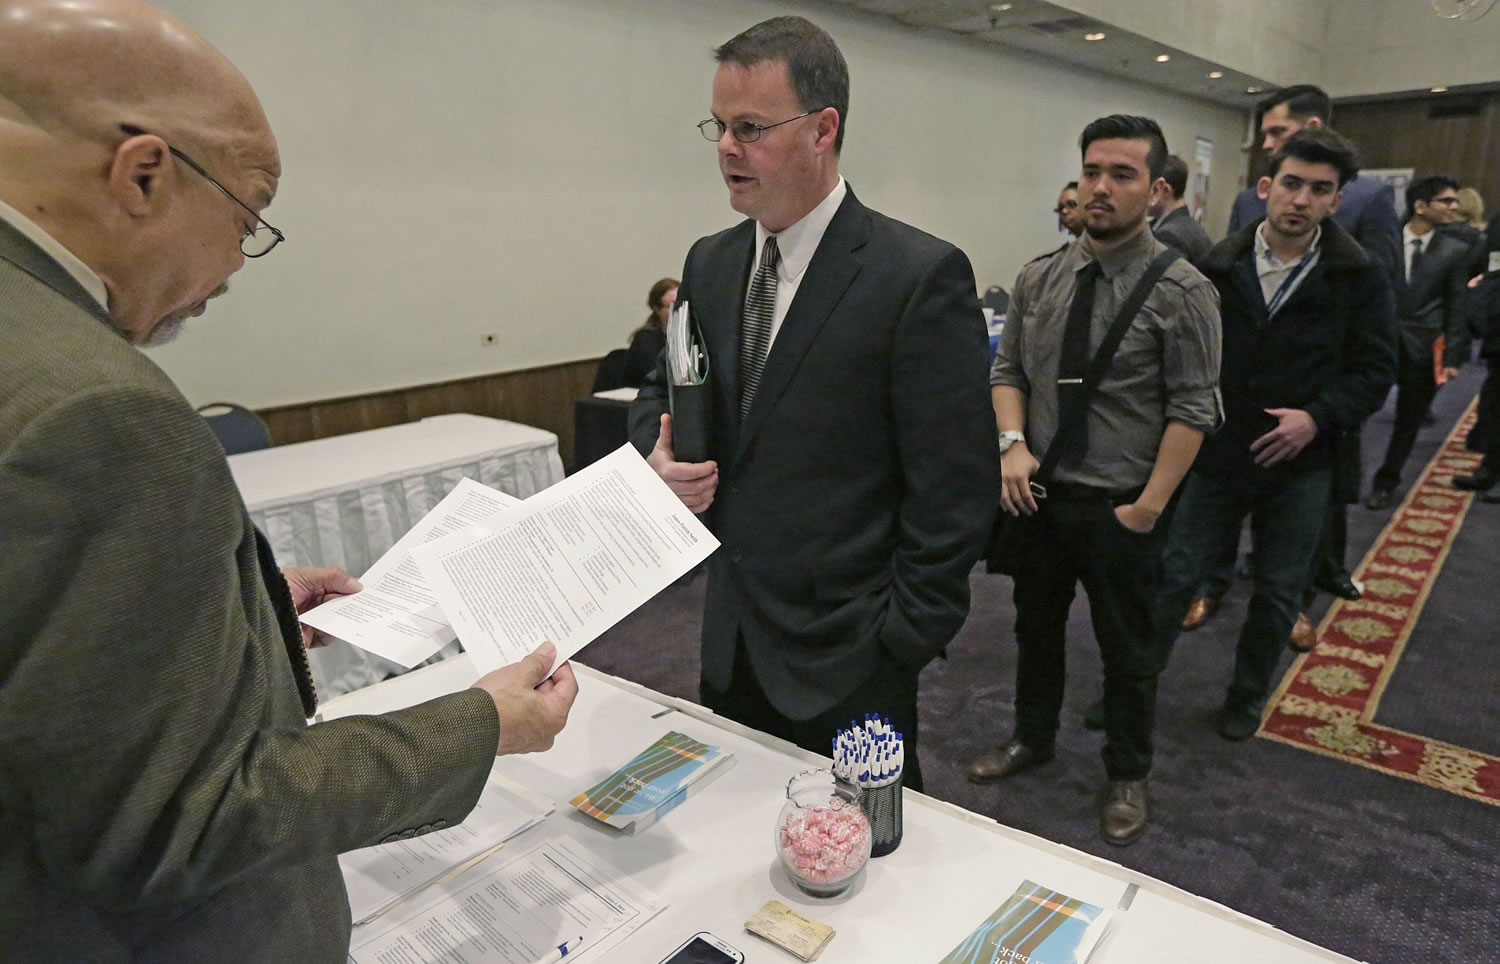 Ralph Logan, general manager of Microtrain, left, speaks with James Smith who is seeking employment April 22 during a National Career Fairs job fair in Chicago. The U.S.